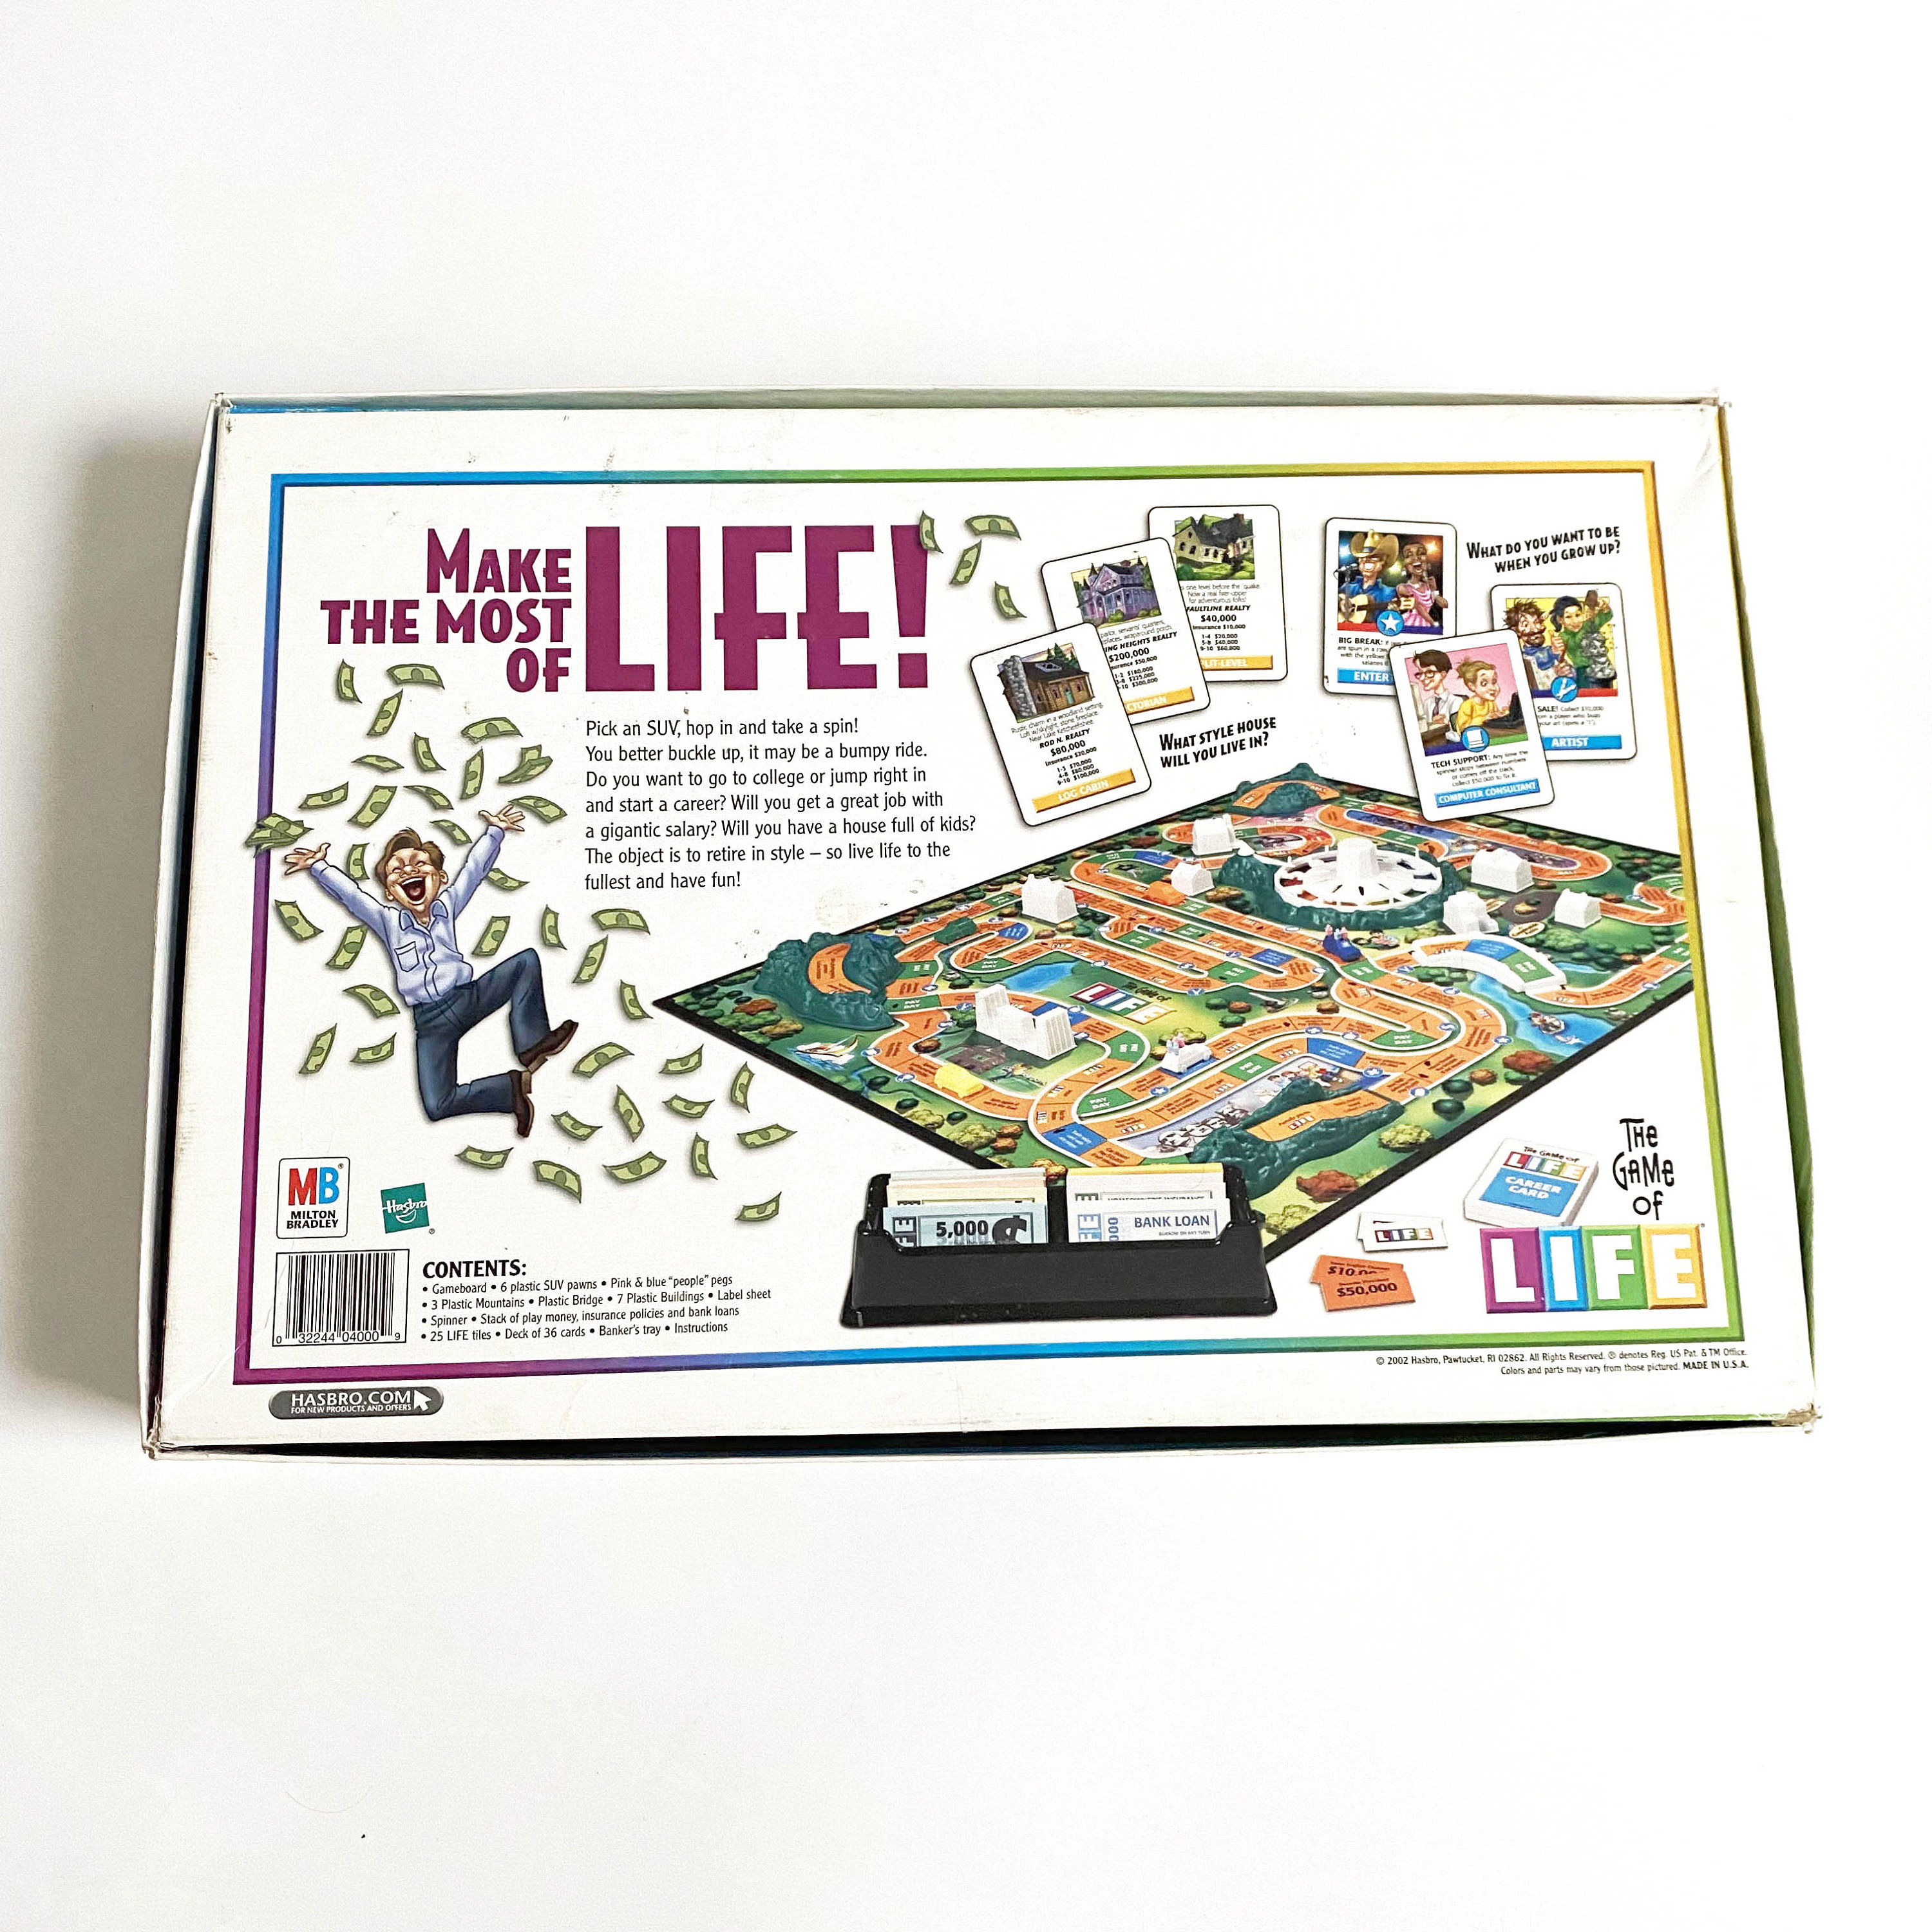 The Game of Life #4000 Original Vintage 1960 Board Game Complete